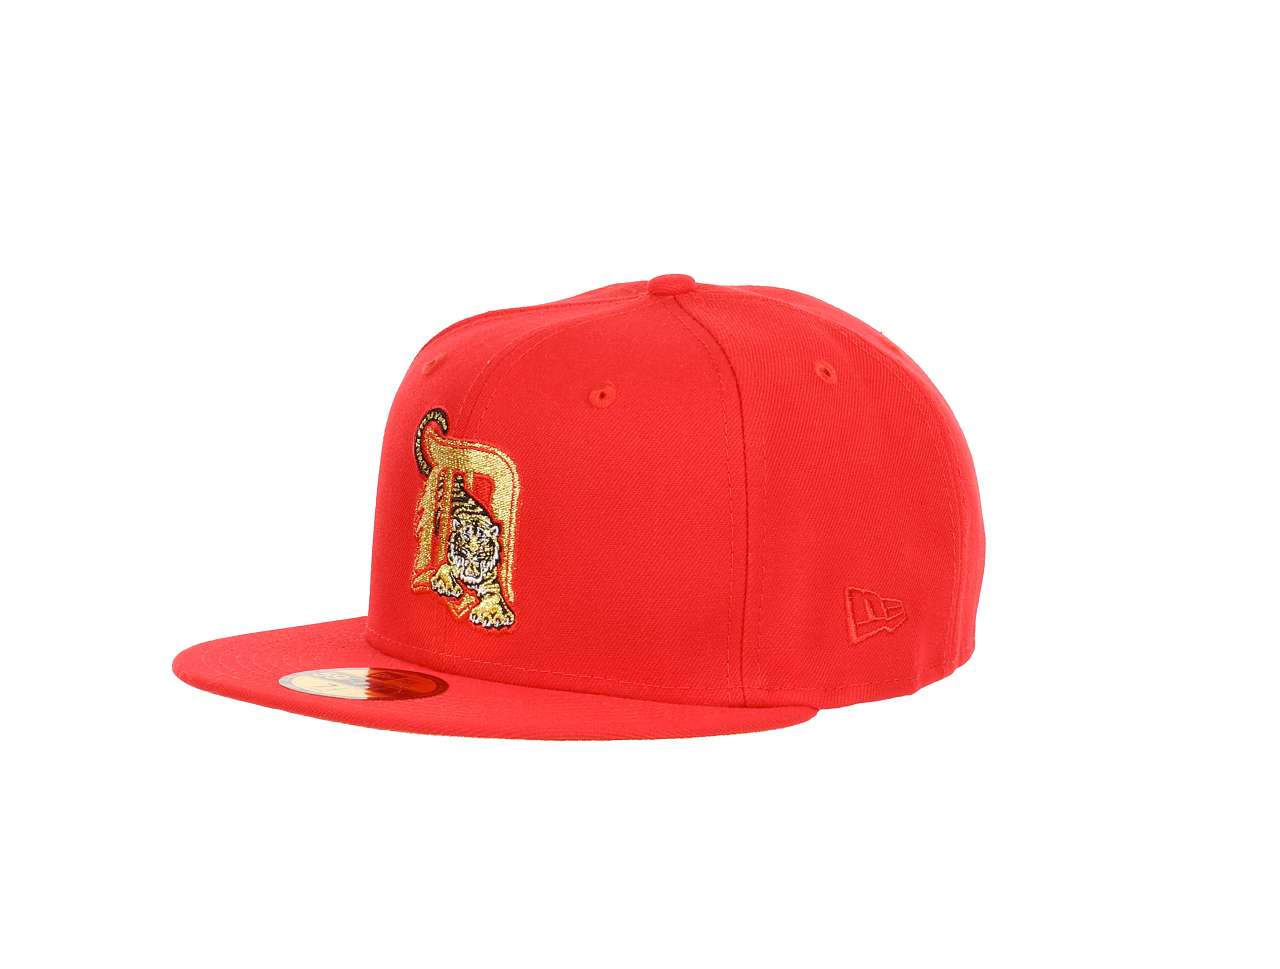 Detroit Tigers MLB Cooperstown 50th Anniversary World Series Champions Sidepatch Red 59Fifty Basecap New Era